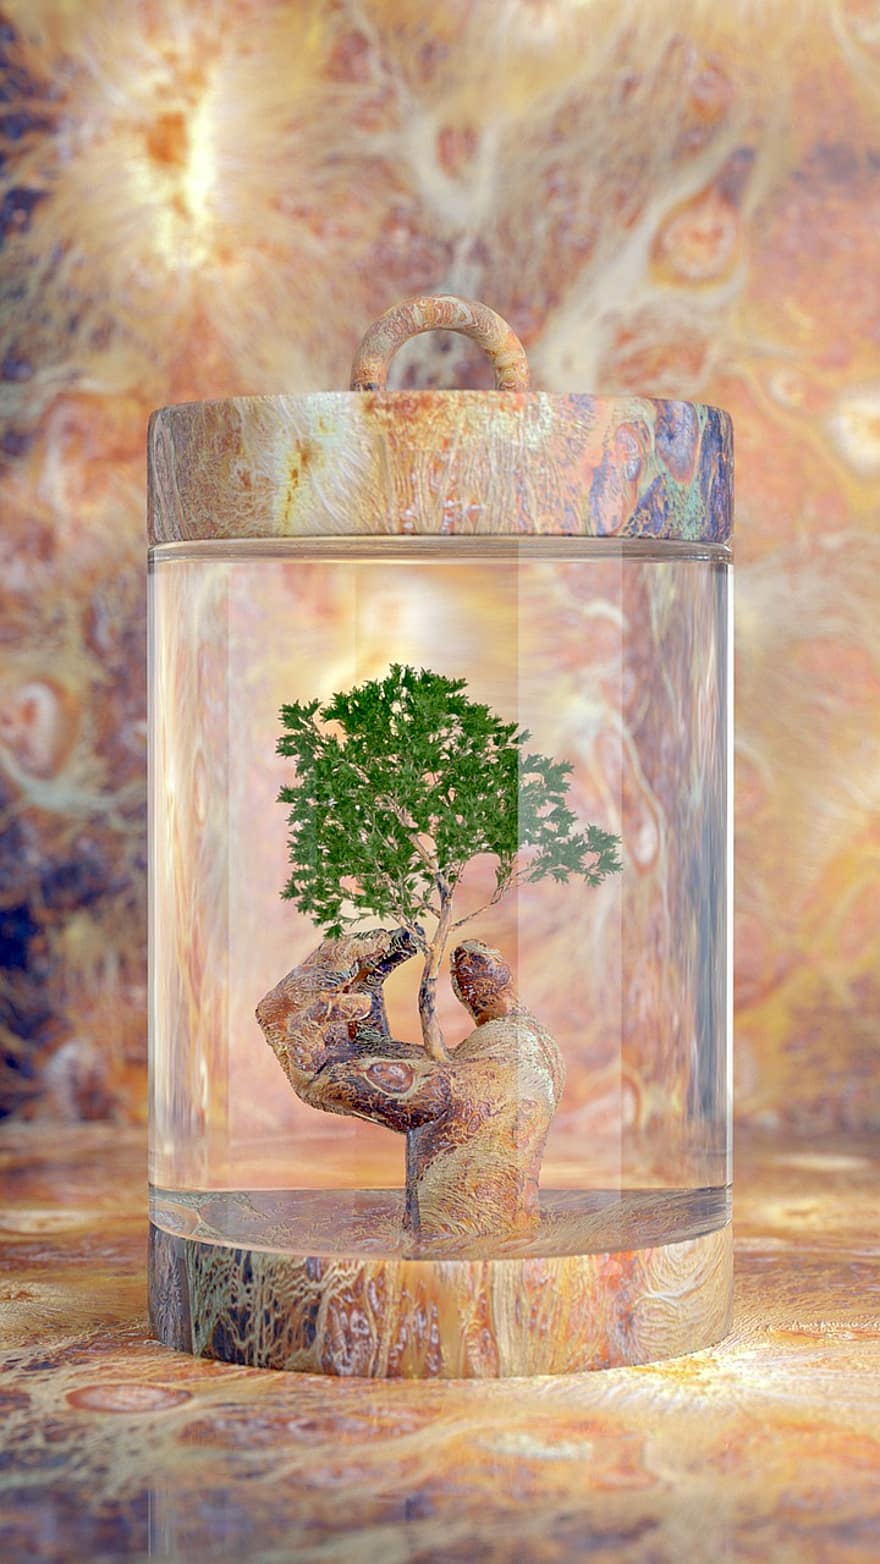 Painting, Imagination, Fantasy, Hand, Glass Bottle, Specimen, Stone, Tree, Superpower, Science Fiction, Brown Science